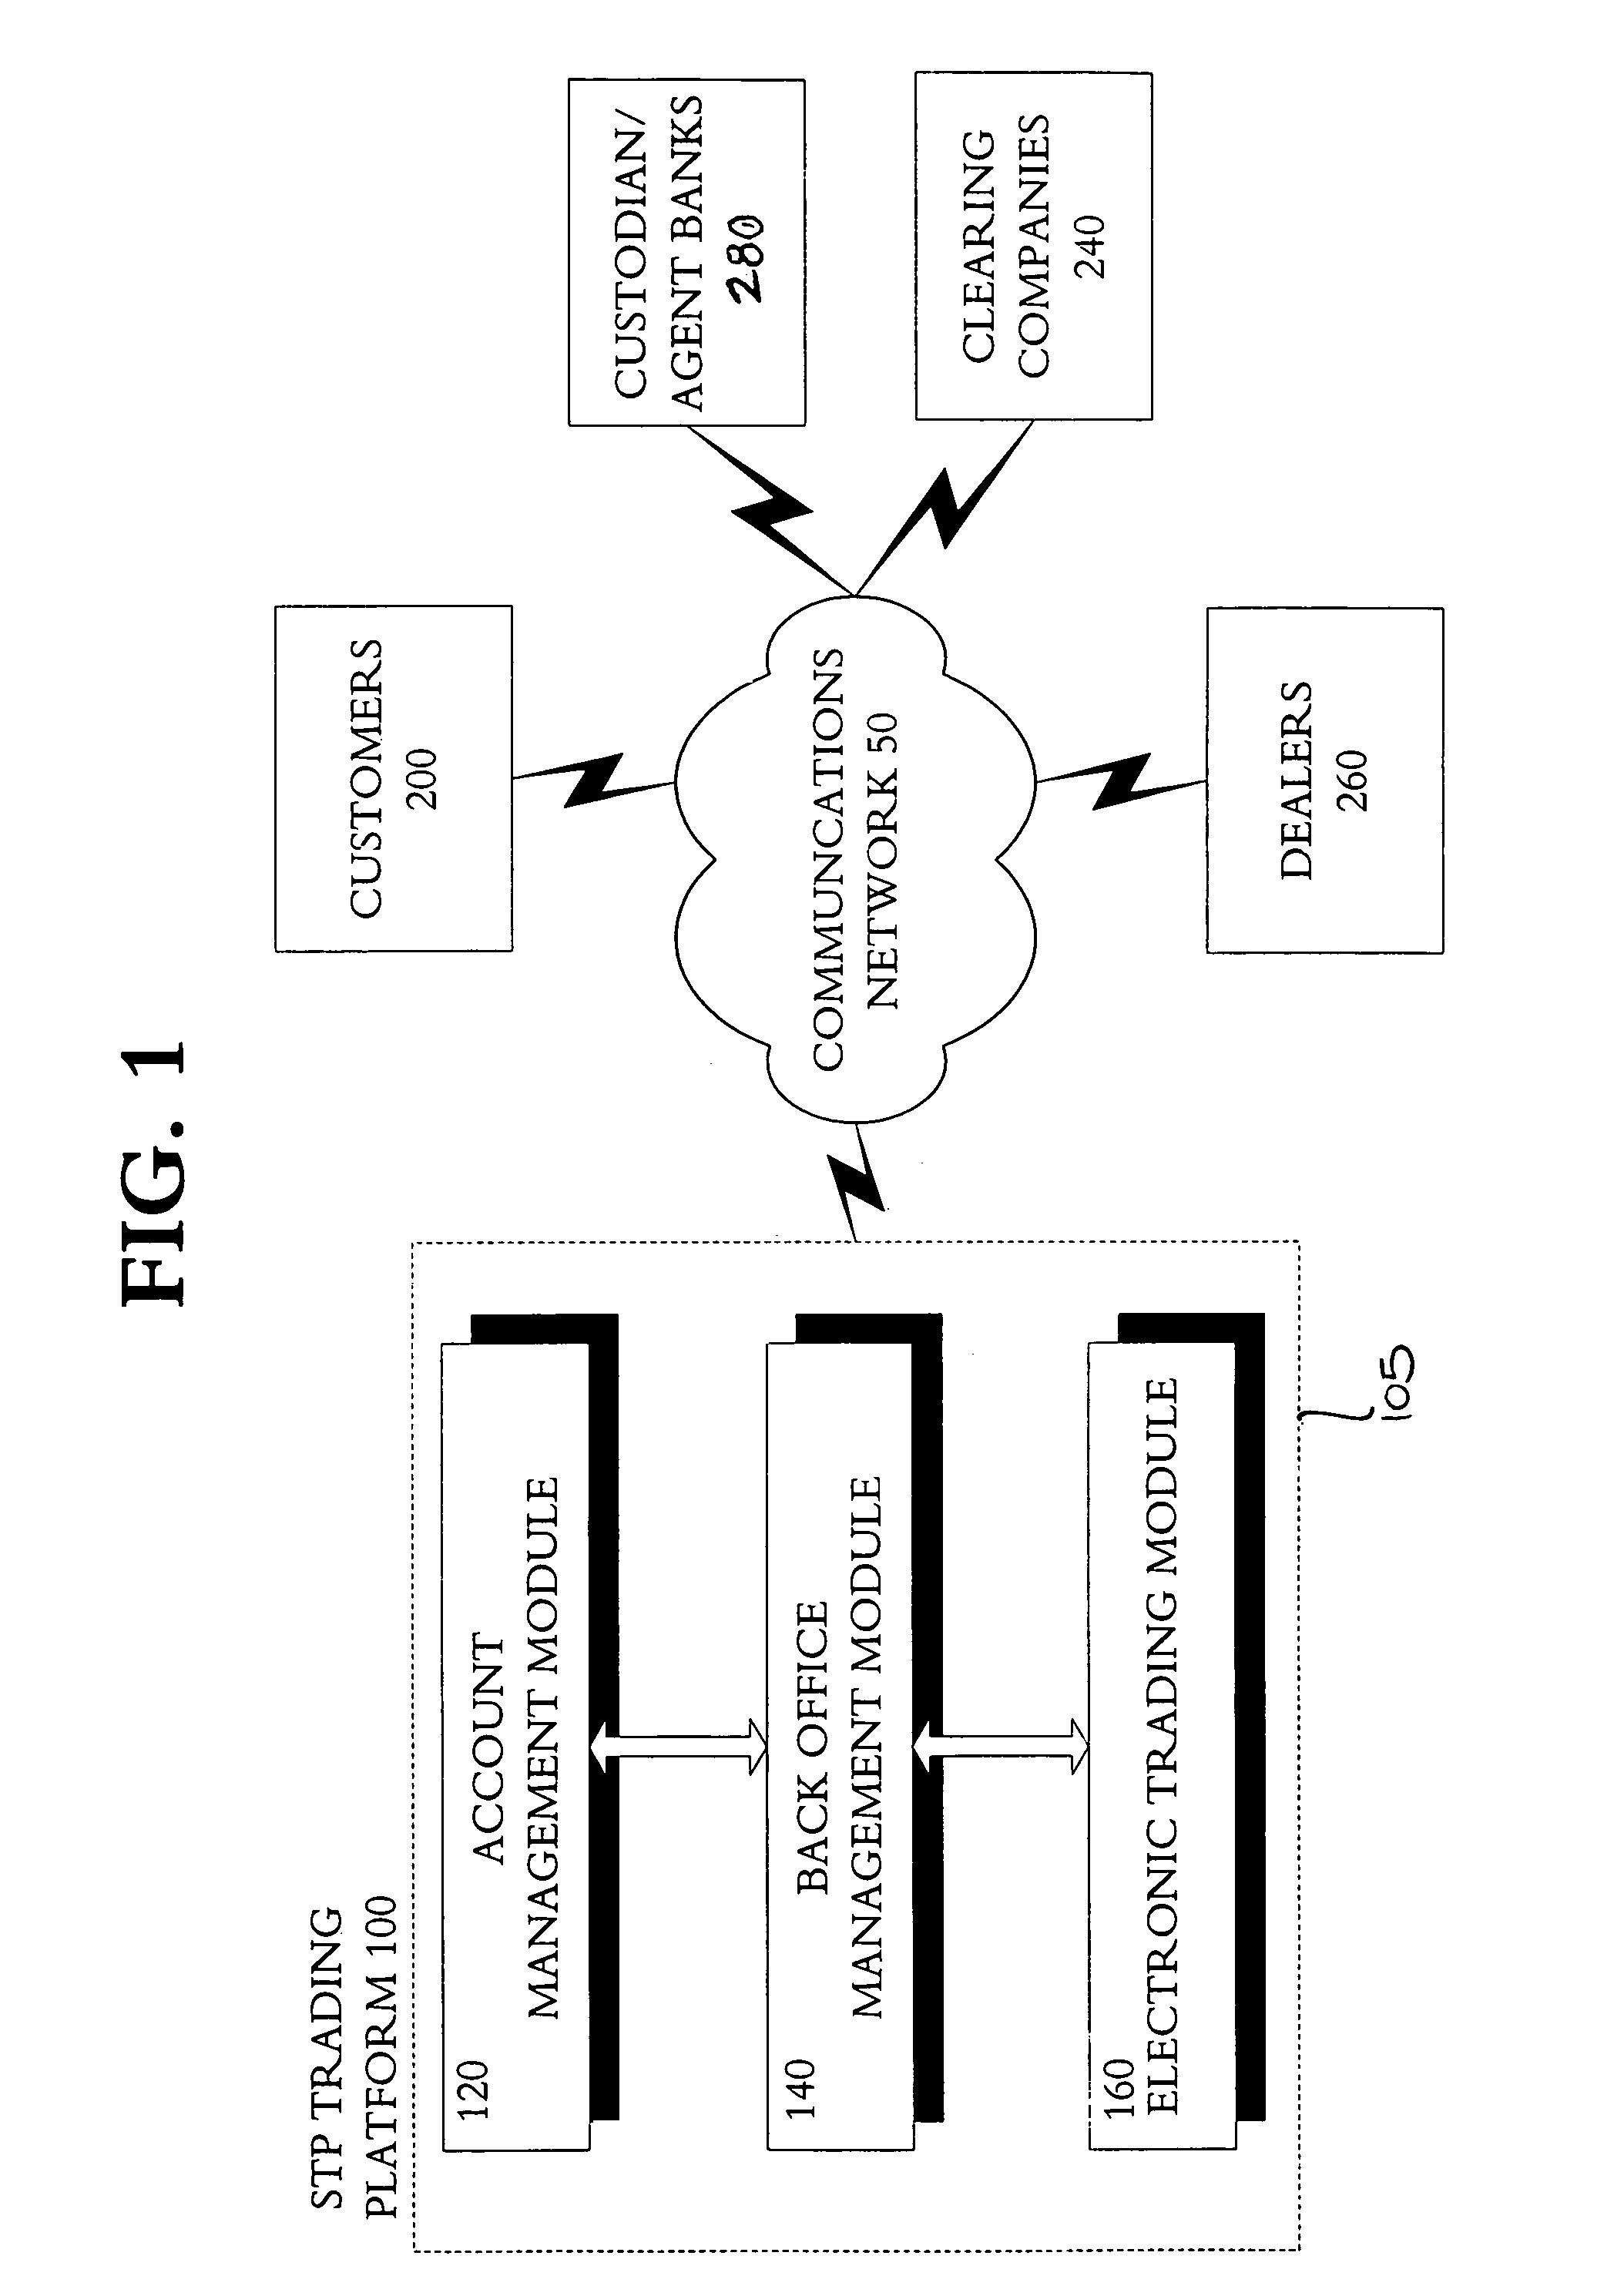 Method and system for effecting straight-through-processing of trades of various financial instruments